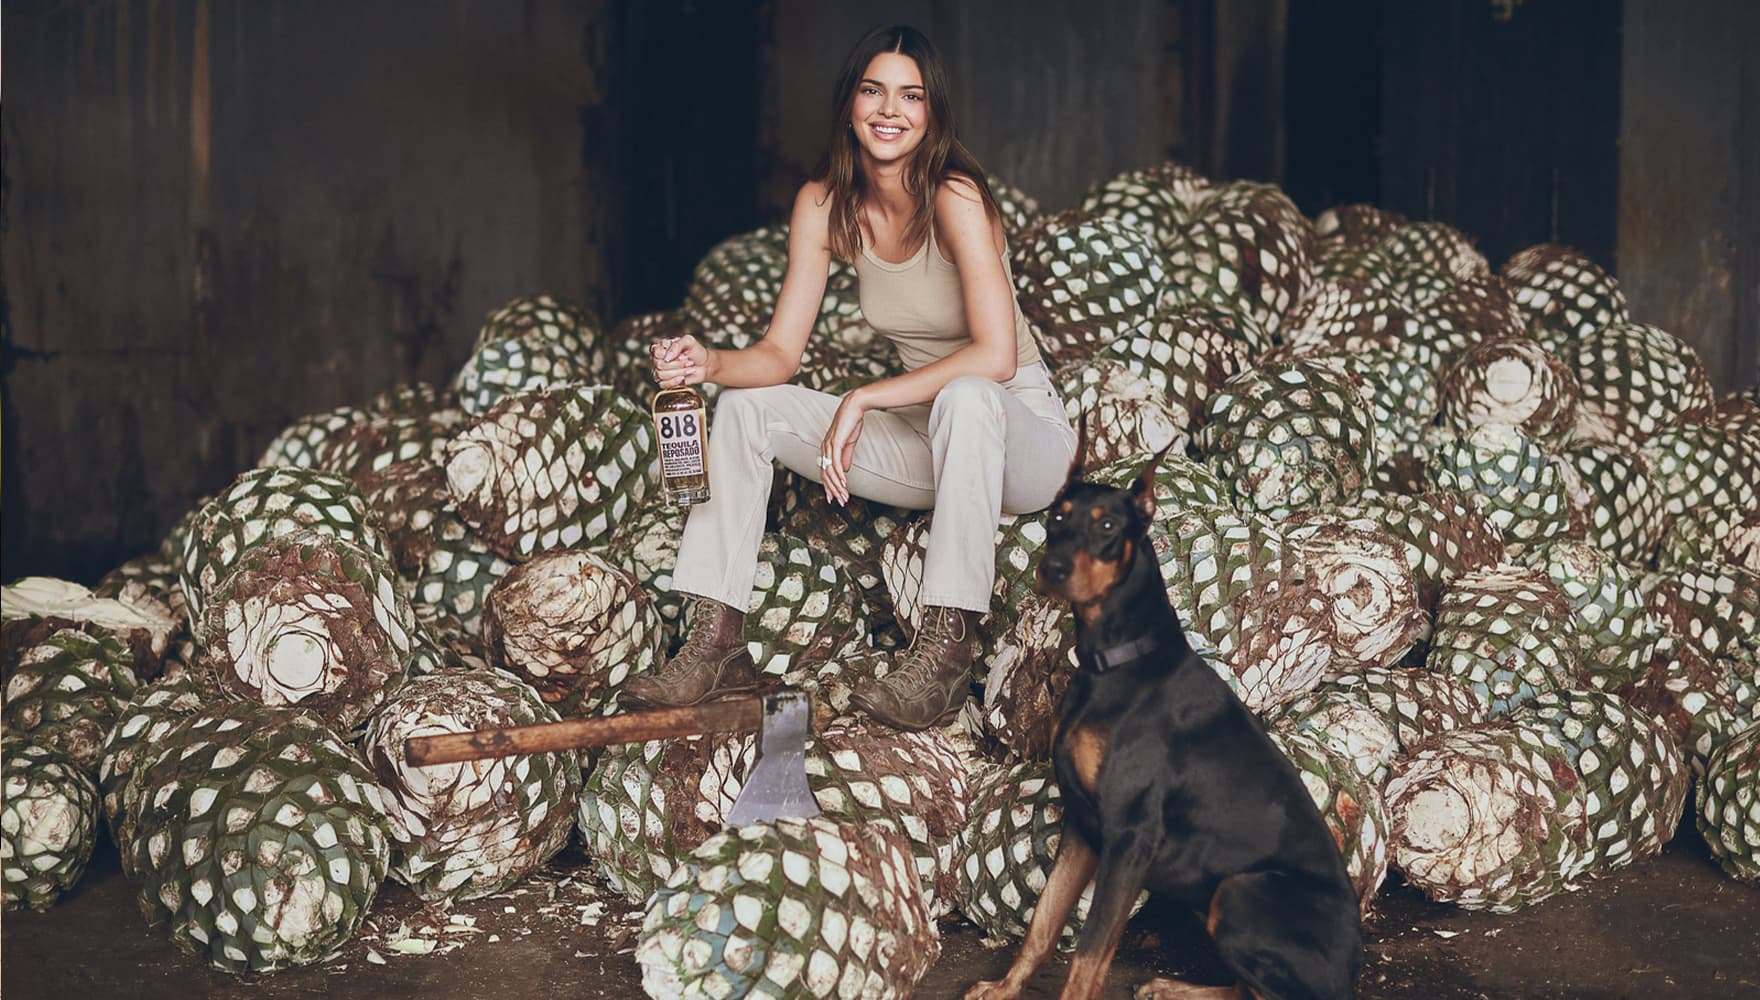 The Complete Compendium of Celebrity Tequila and Mezcal